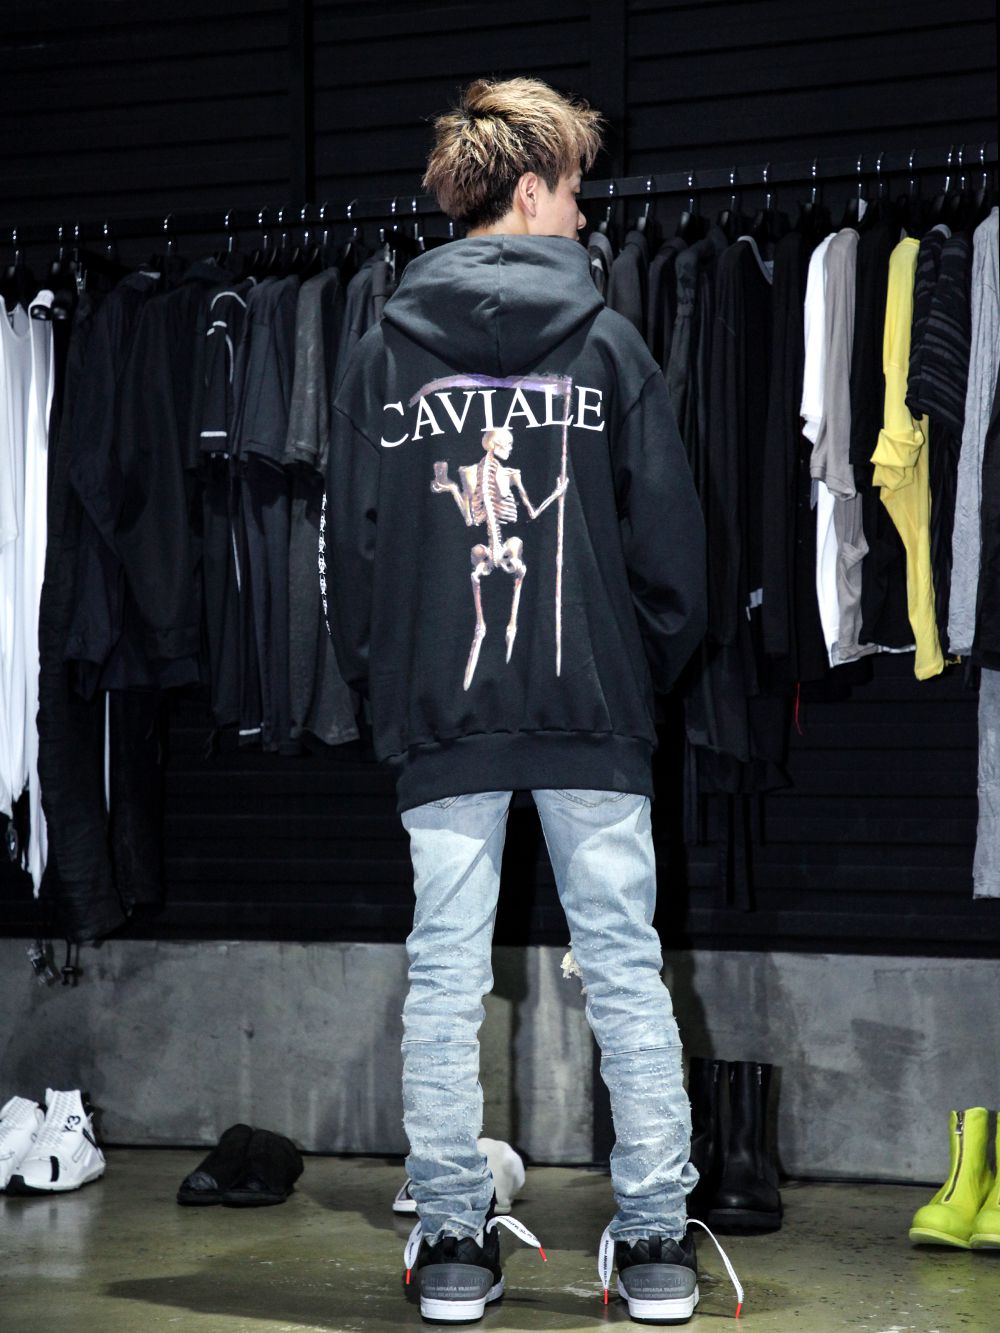 CAVIALE x The R LIMITED HOODIE Styling - FASCINATE BLOG